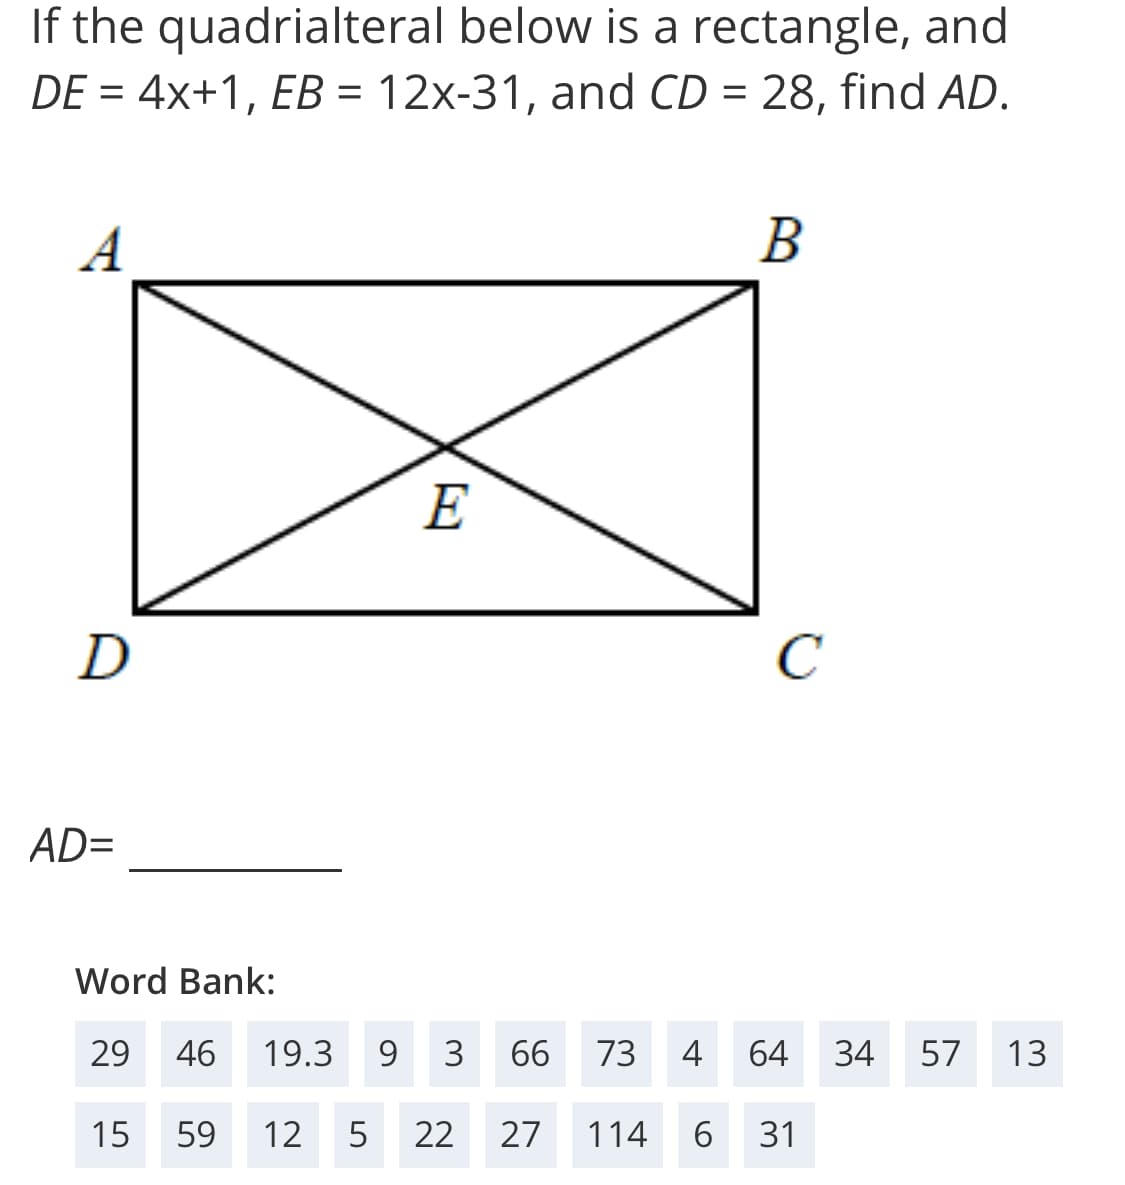 If the quadrialteral below is a rectangle, and
DE = 4x+1, EB = 12x-31, and CD = 28, find AD.
A
В
E
D
C
AD=
Word Bank:
29
46
19.3
9
3
66
73
4
64
34
57
13
15
59
12
5
22
27
114
31
